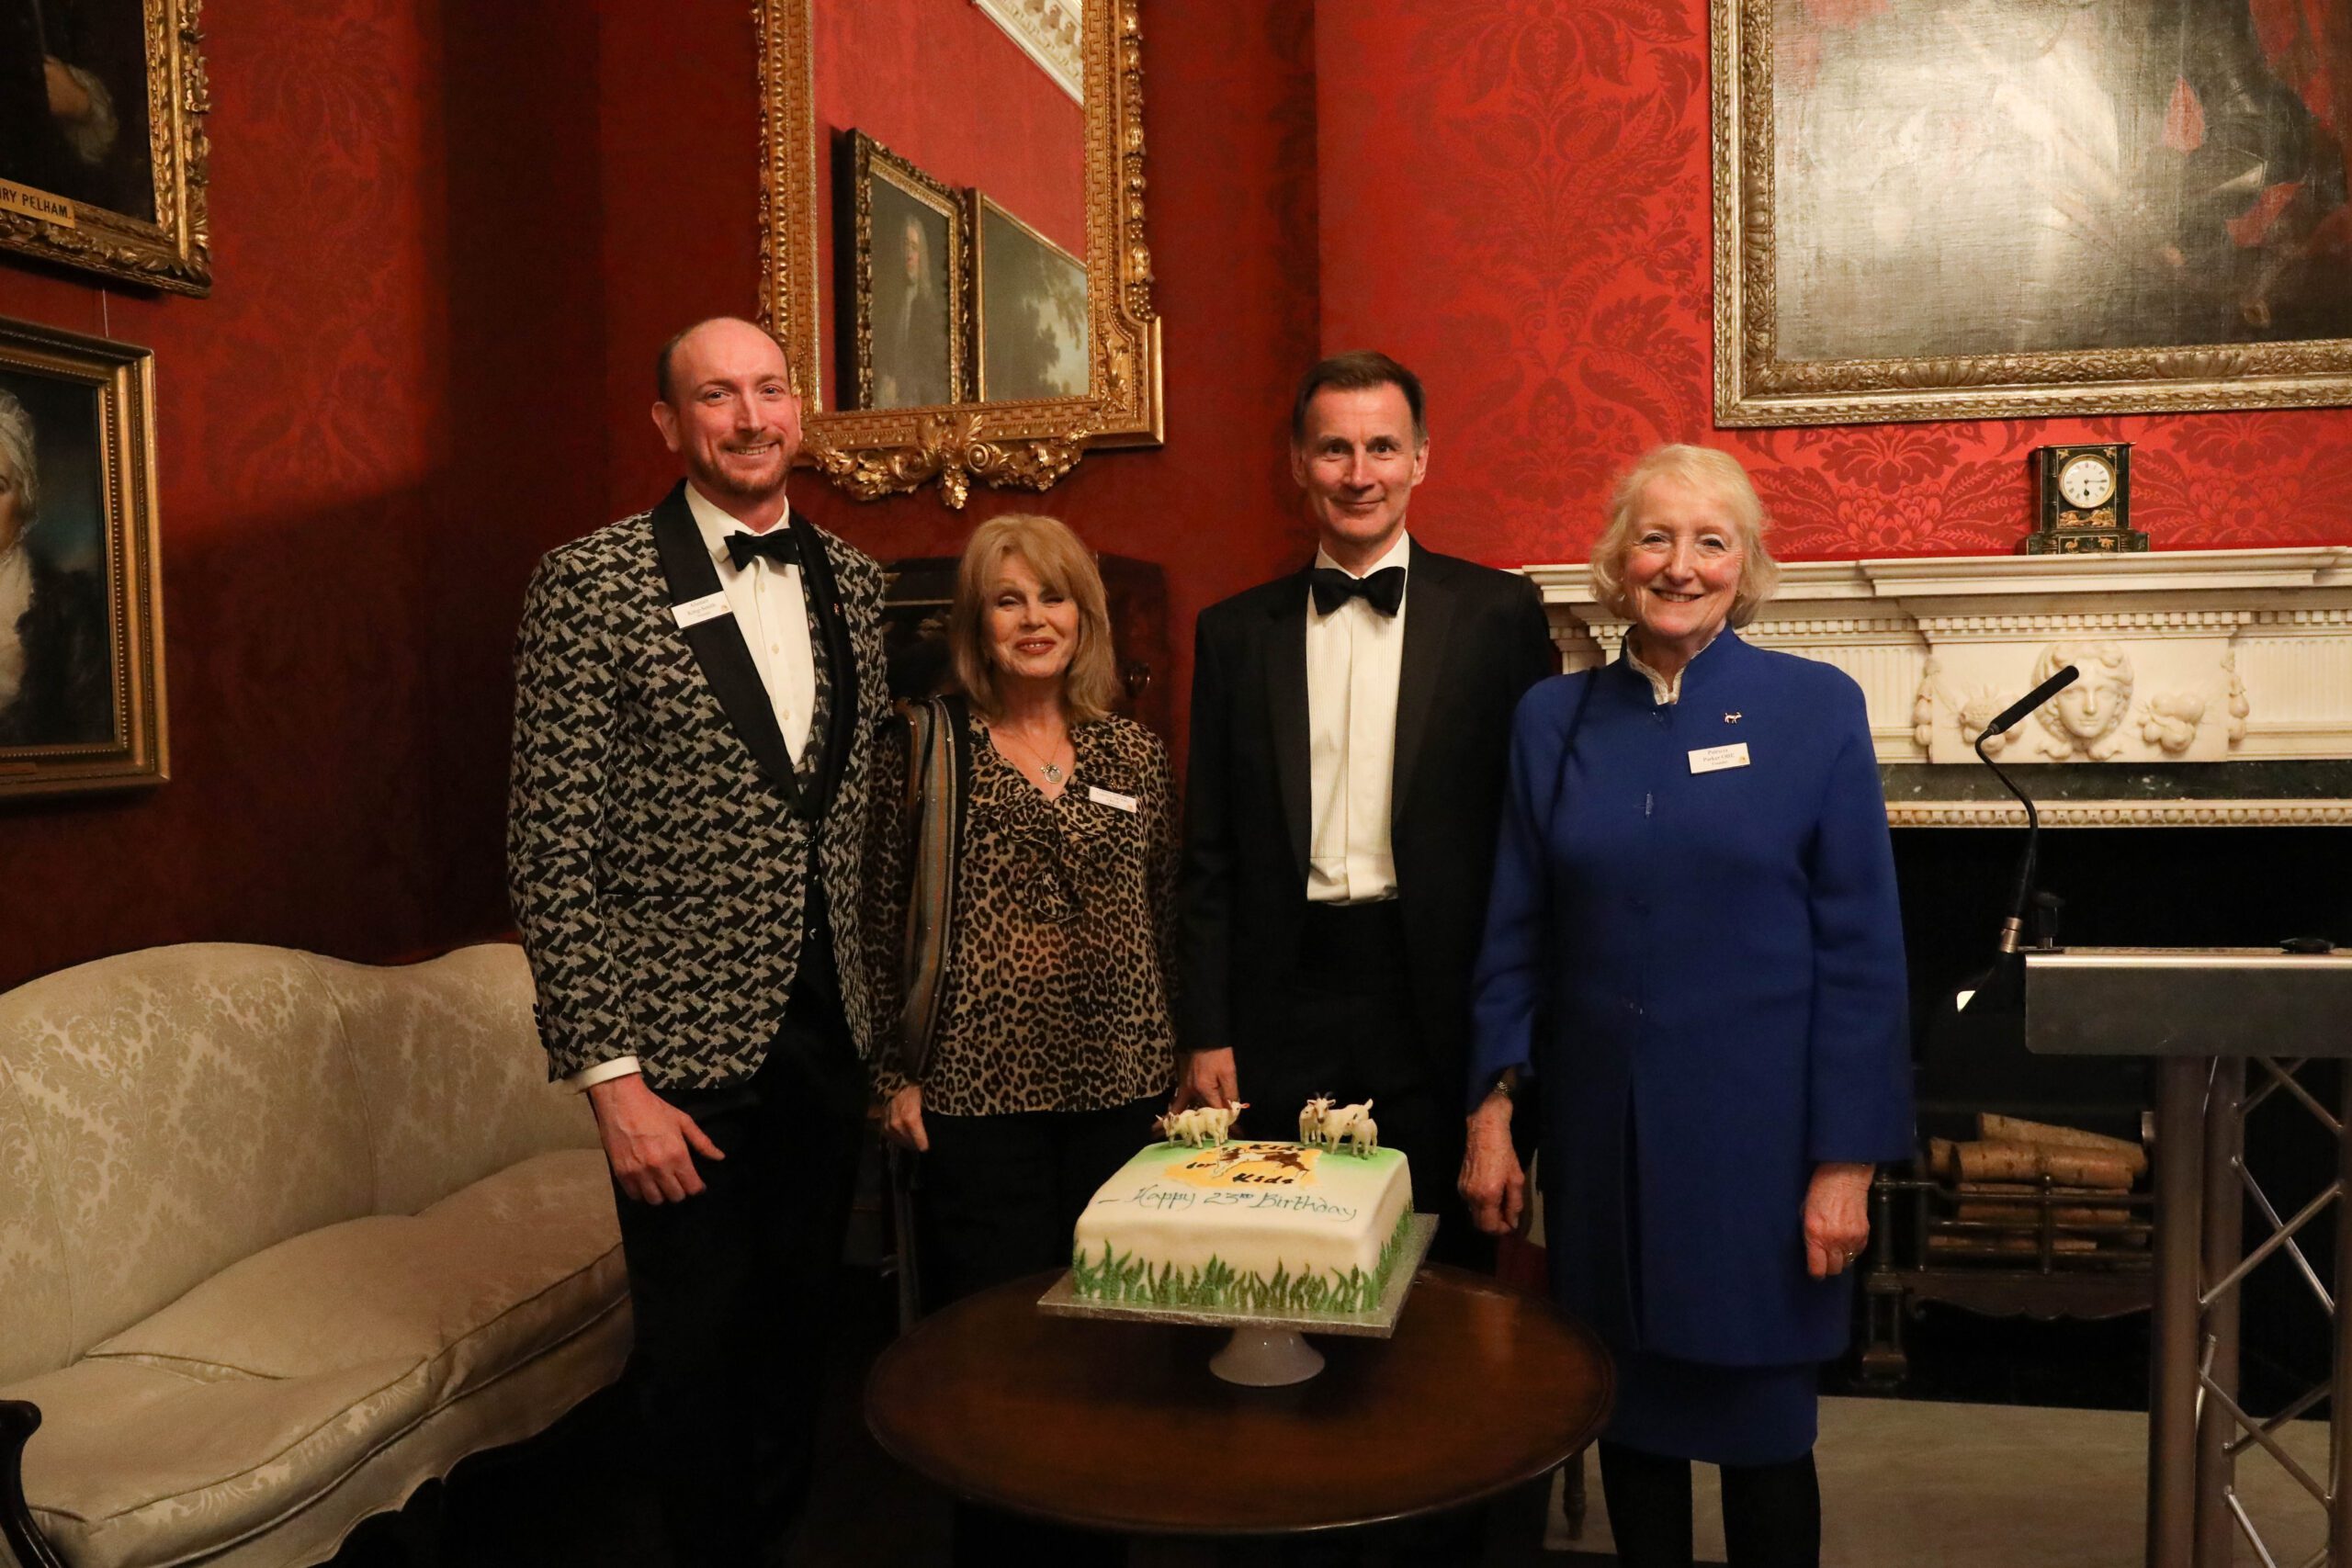 Alastair King Smith, Dame Joanna Lumley, Jeremy Hunt MP and Patricia Parker OBE